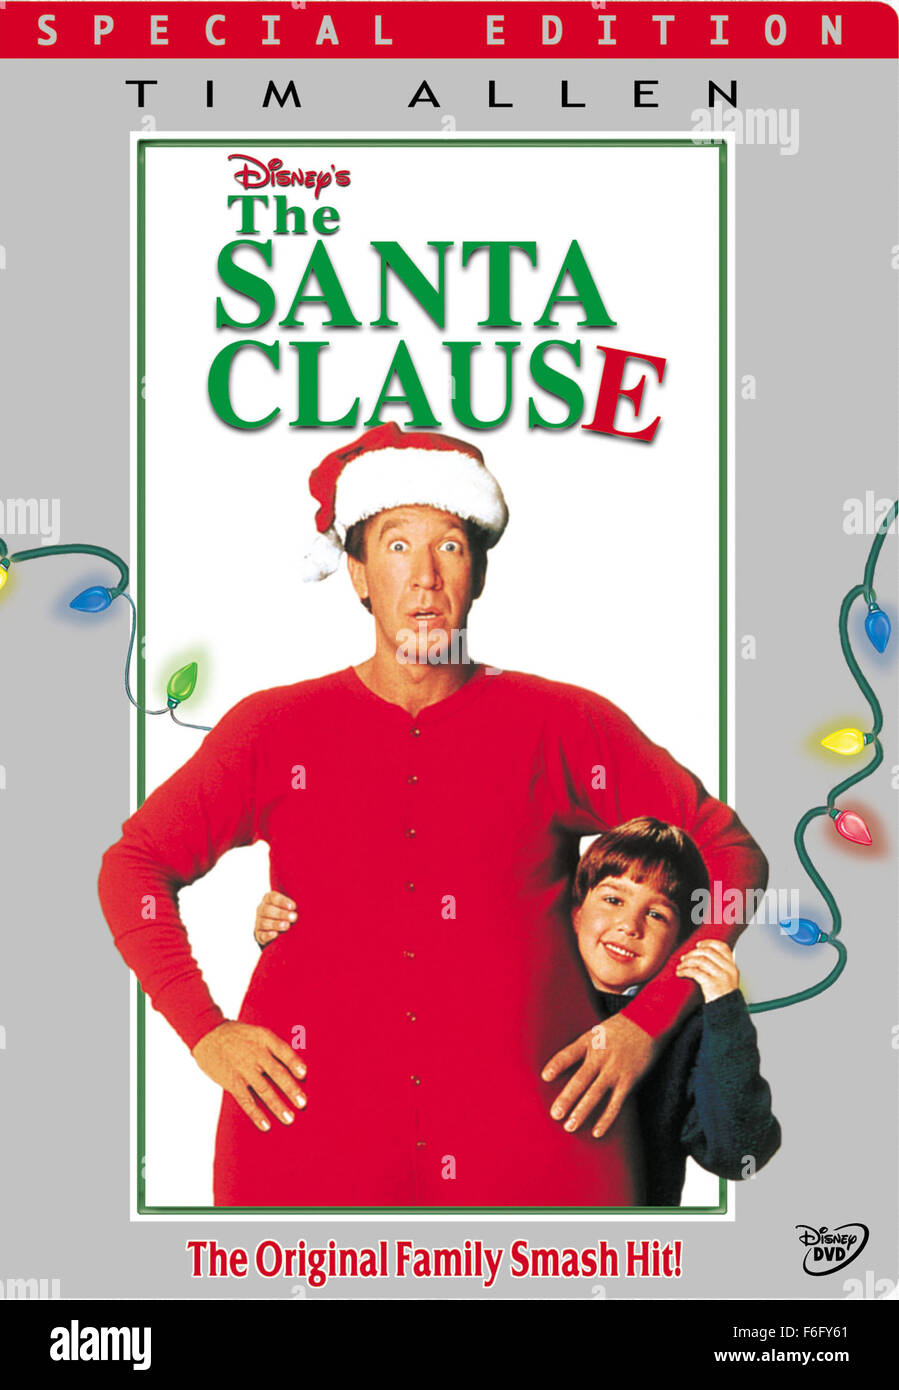 Nov 11, 1994; Toronto, ON, Canada; Art cover for 'The Santa Clause'. Directed by Josh Pasquin. Stock Photo